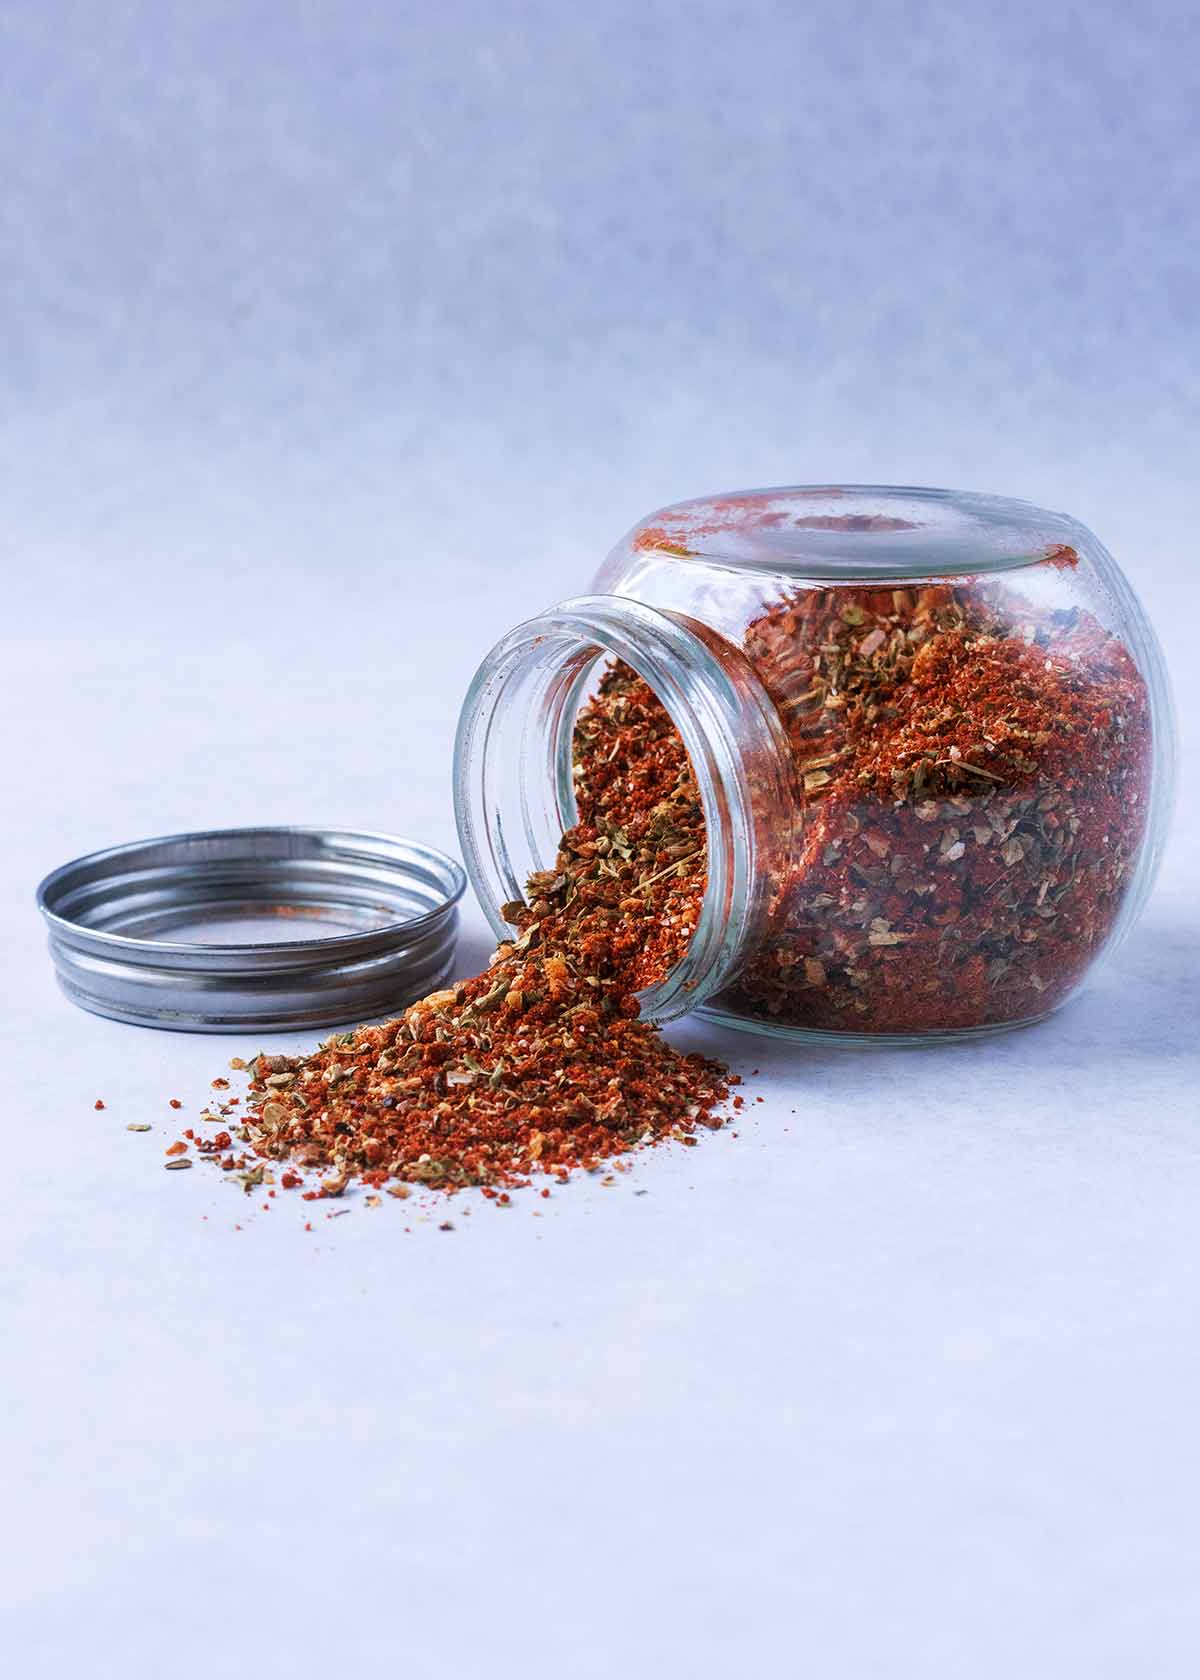 A glass jar on its side with a spice blend spilling out.